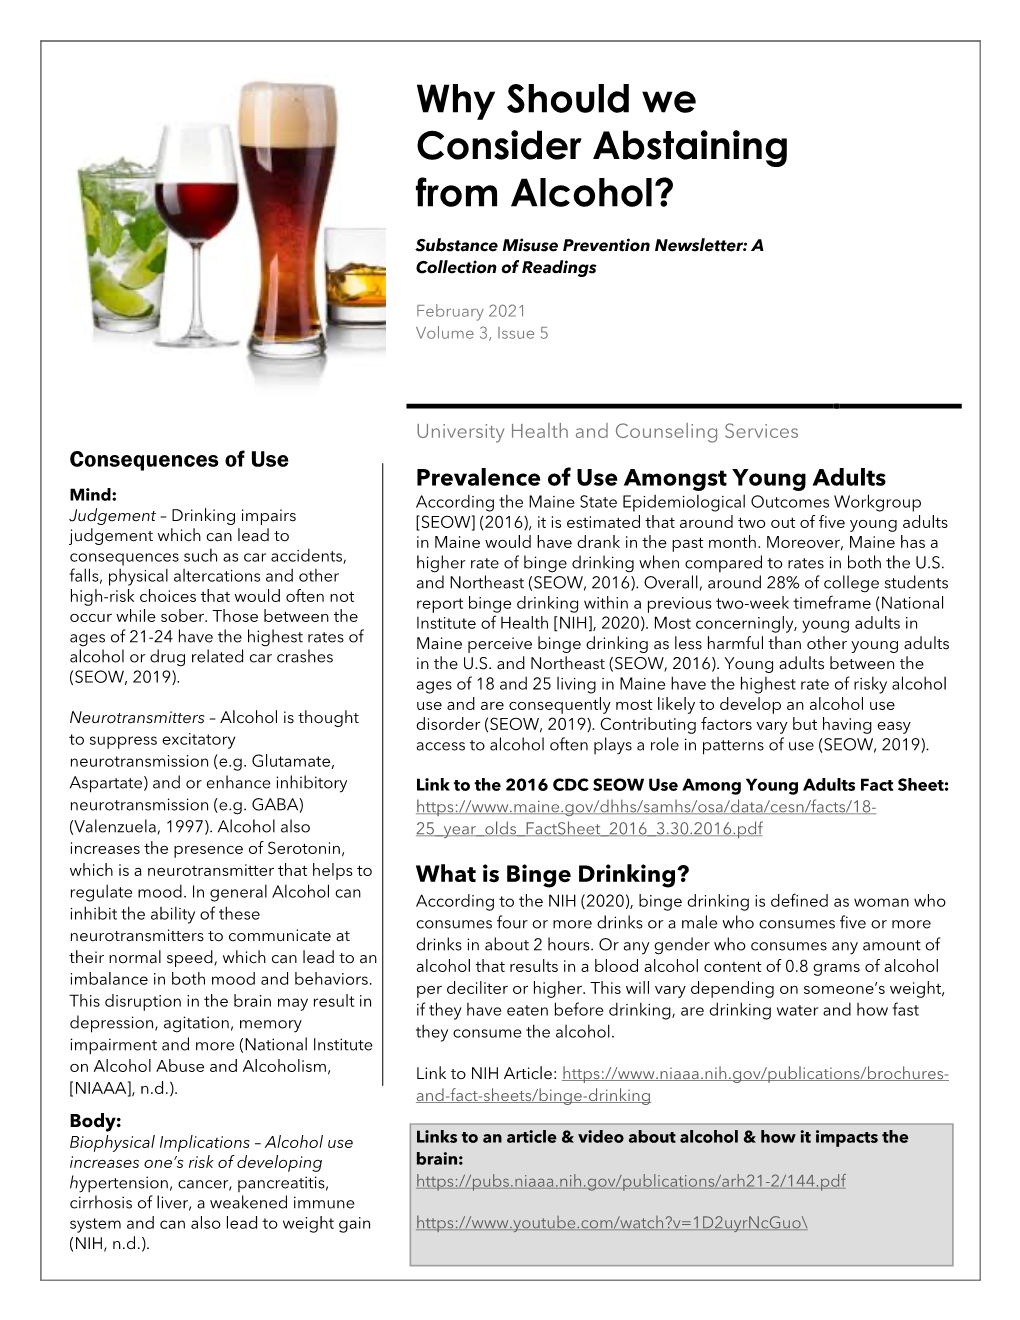 Why Should We Consider Abstaining from Alcohol?